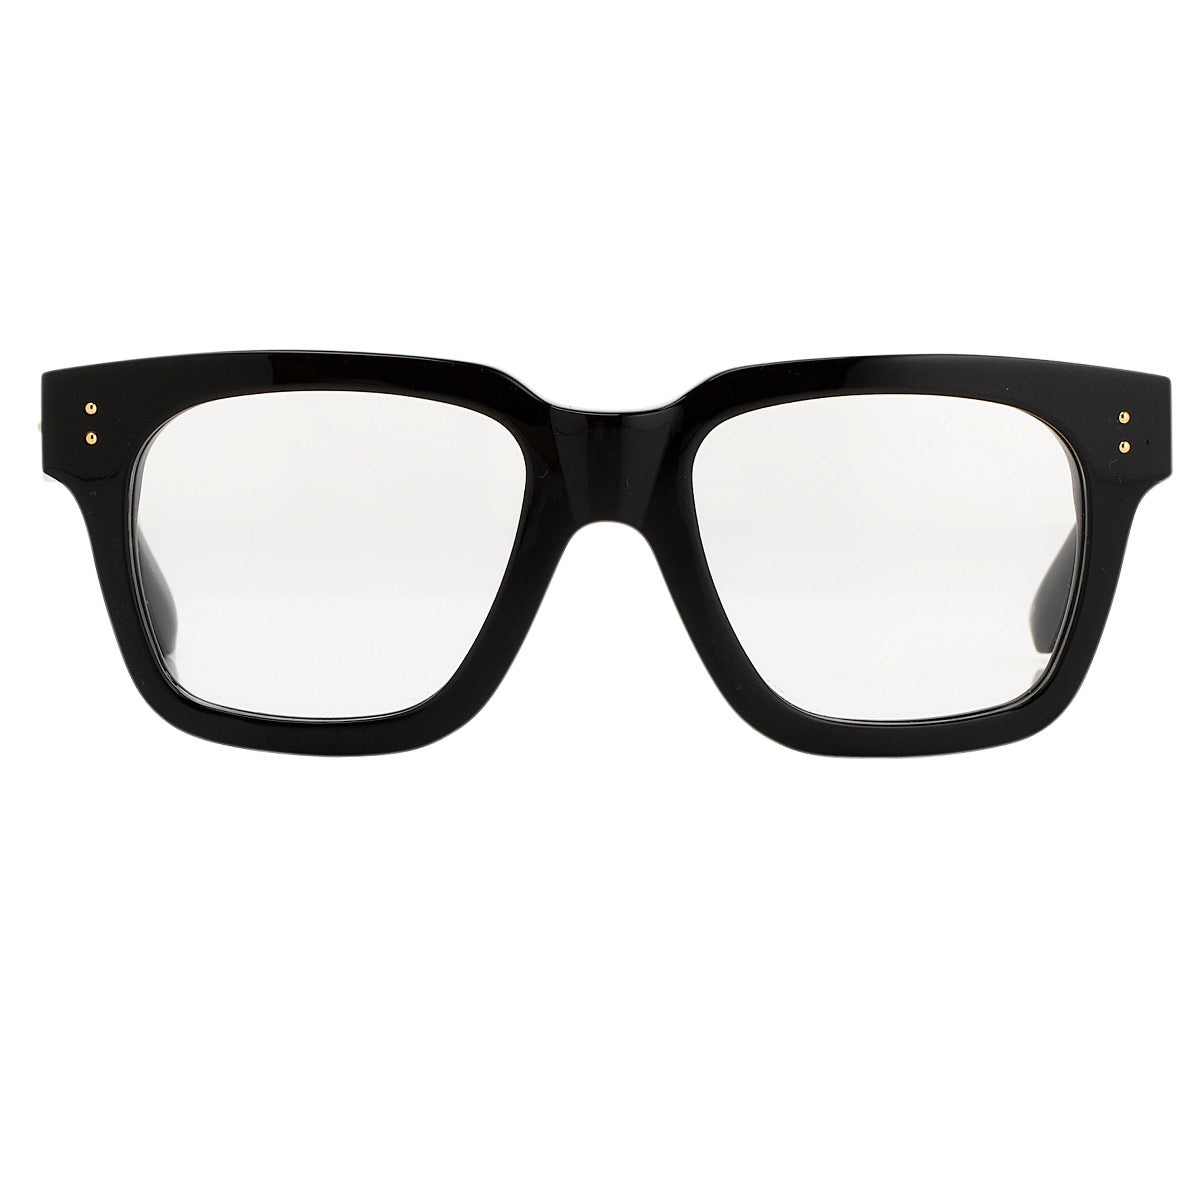 The Max Optical D-Frame in Black (C1)